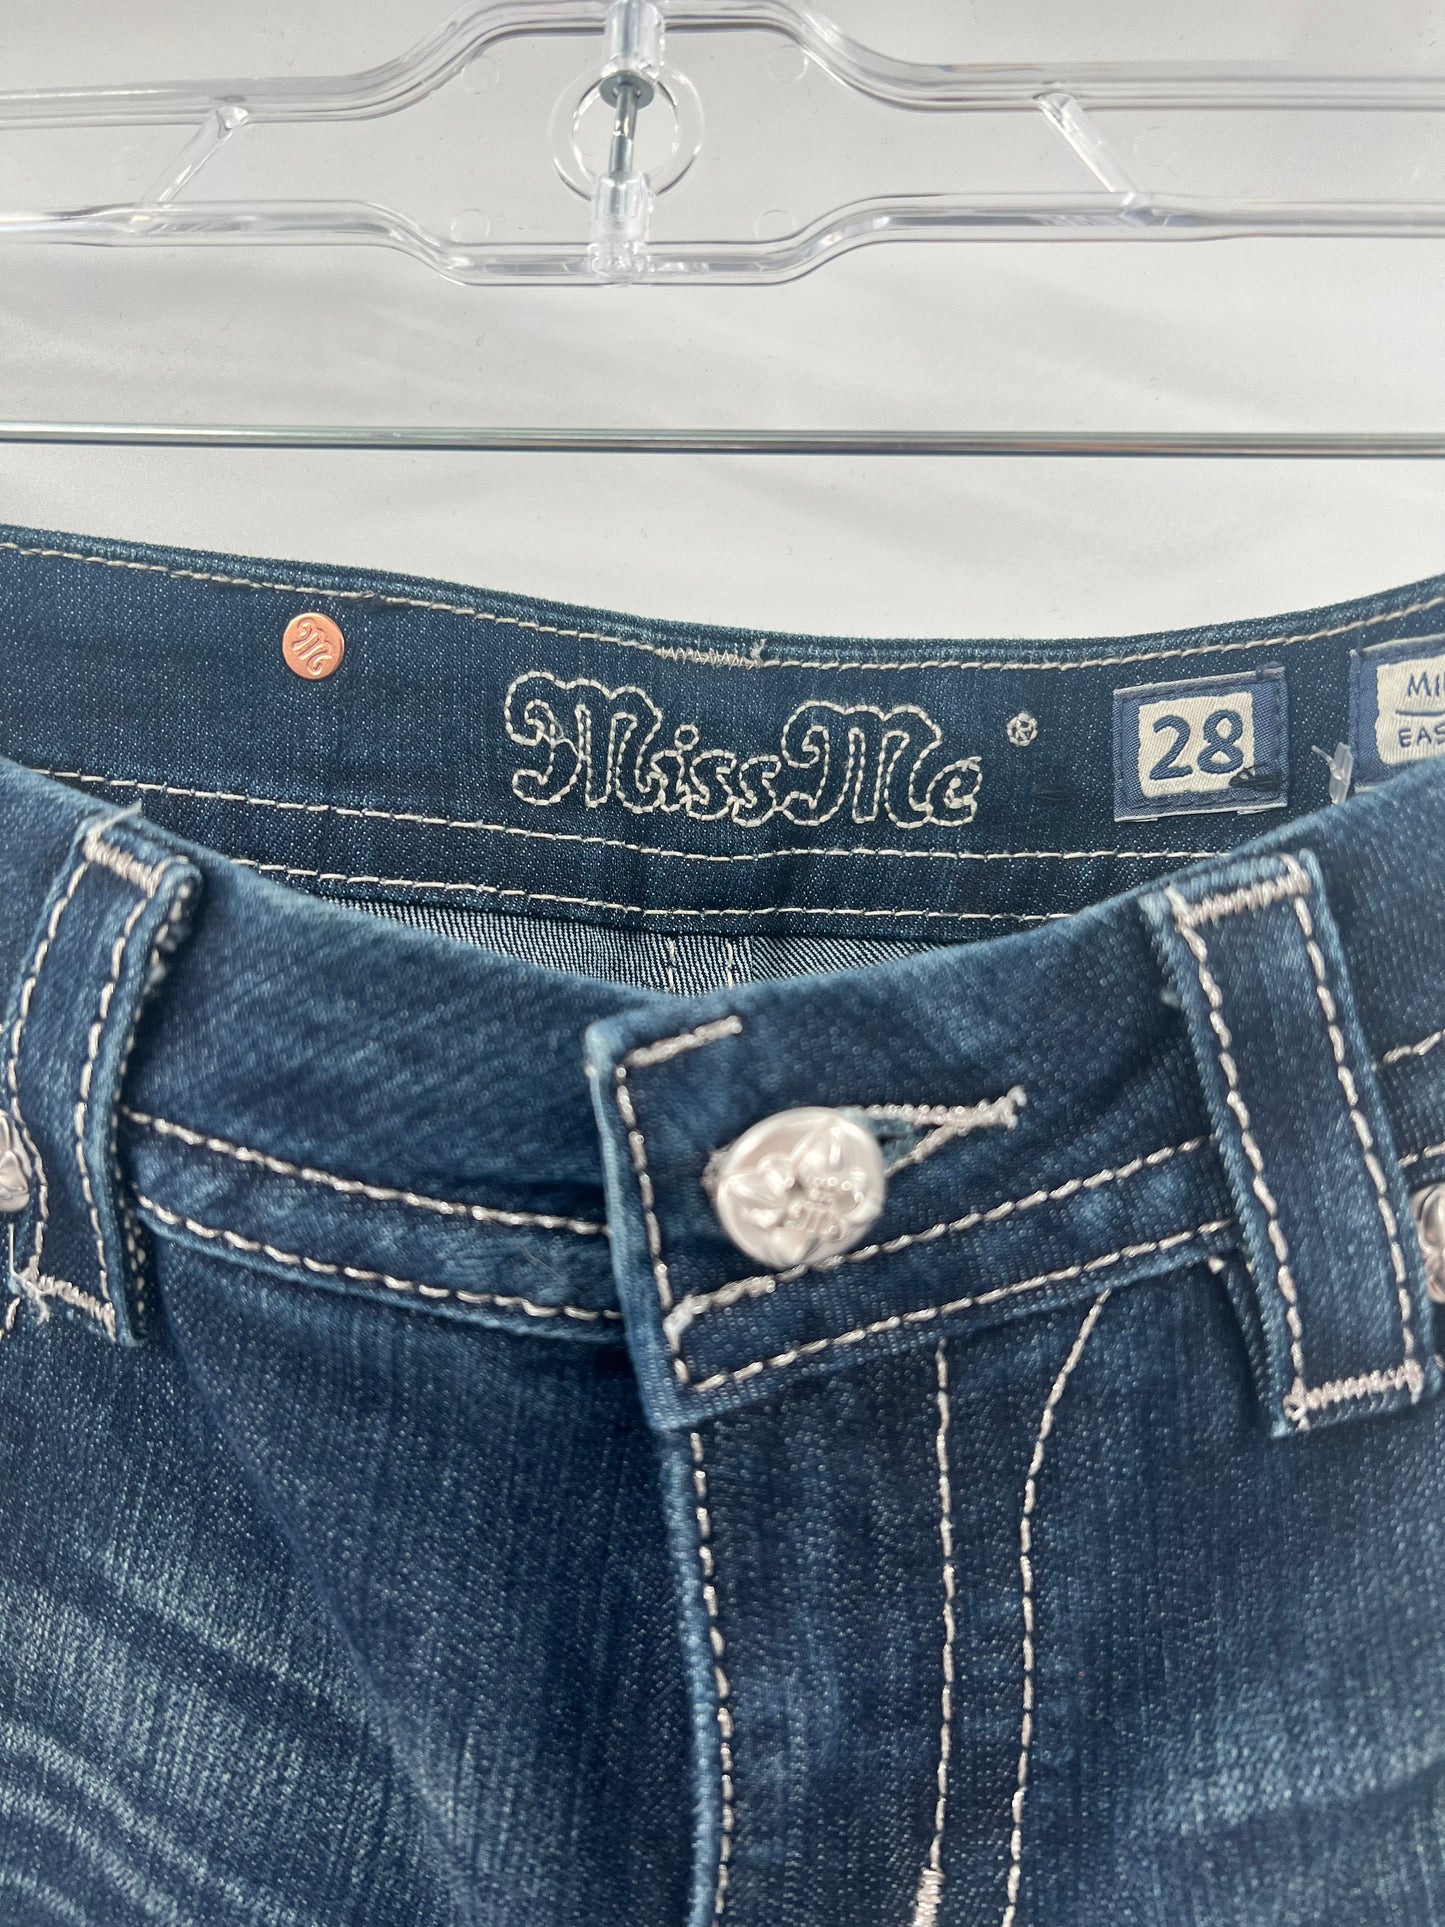 Miss Me Embroidered Rhinestone Gem Jeans With Unique Buttons and Stitching (Size 28)